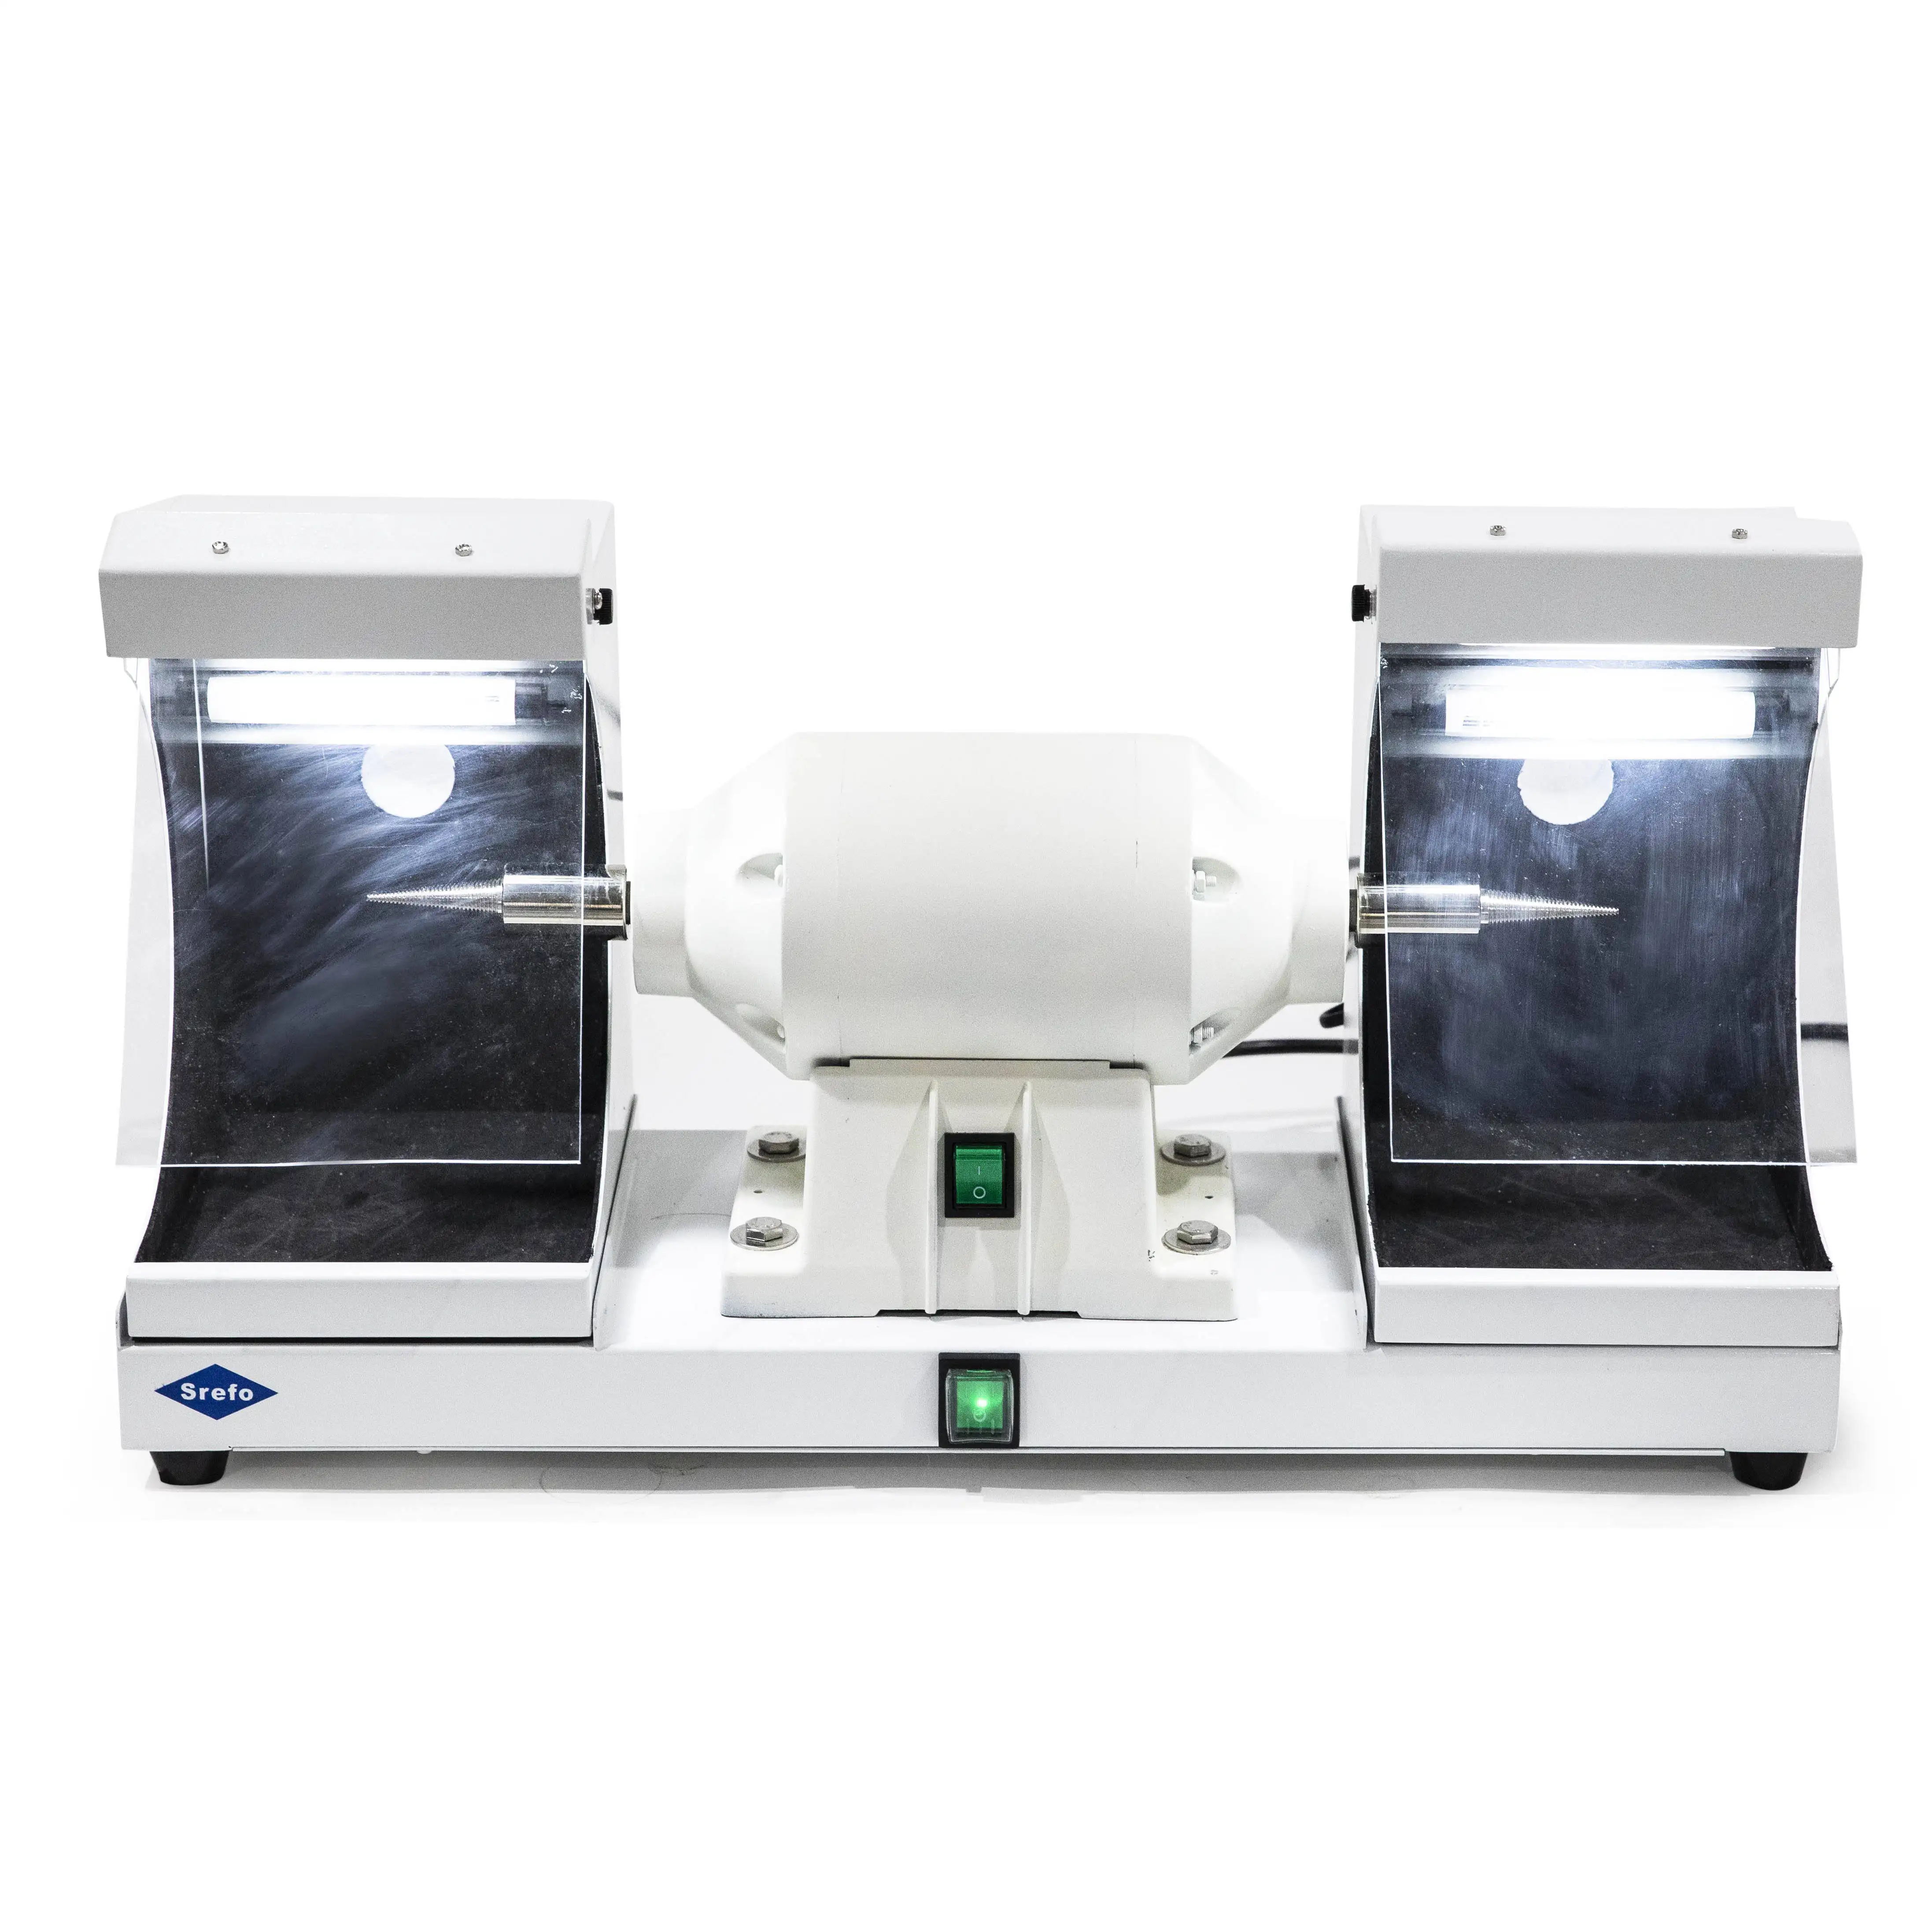 Hot Sale Srefo Mc-106 Dental Lab High Speed Alloy Grinding And Polishing Lathe Unit For Flexible Dentures And Porcelain Teeth